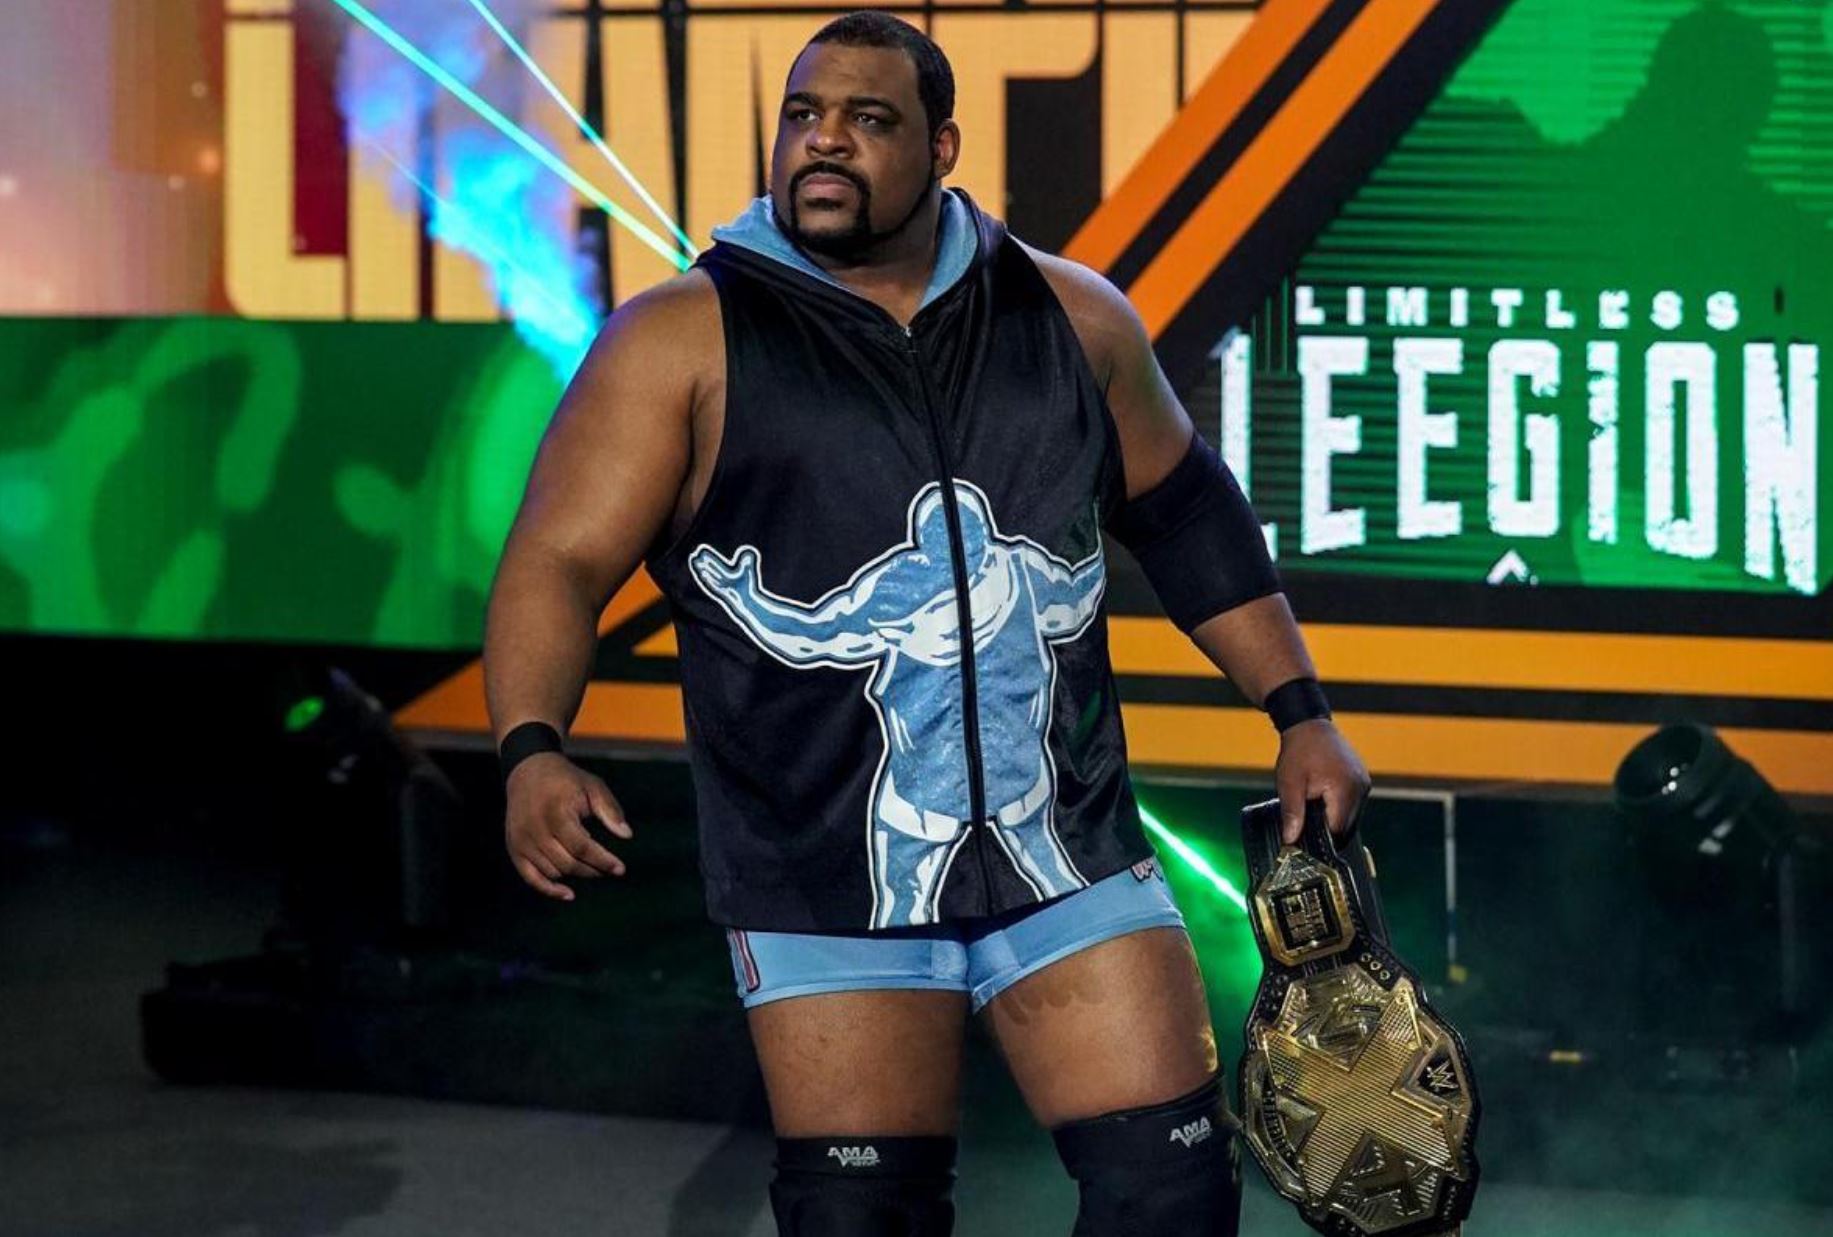 keith lee thought career was over